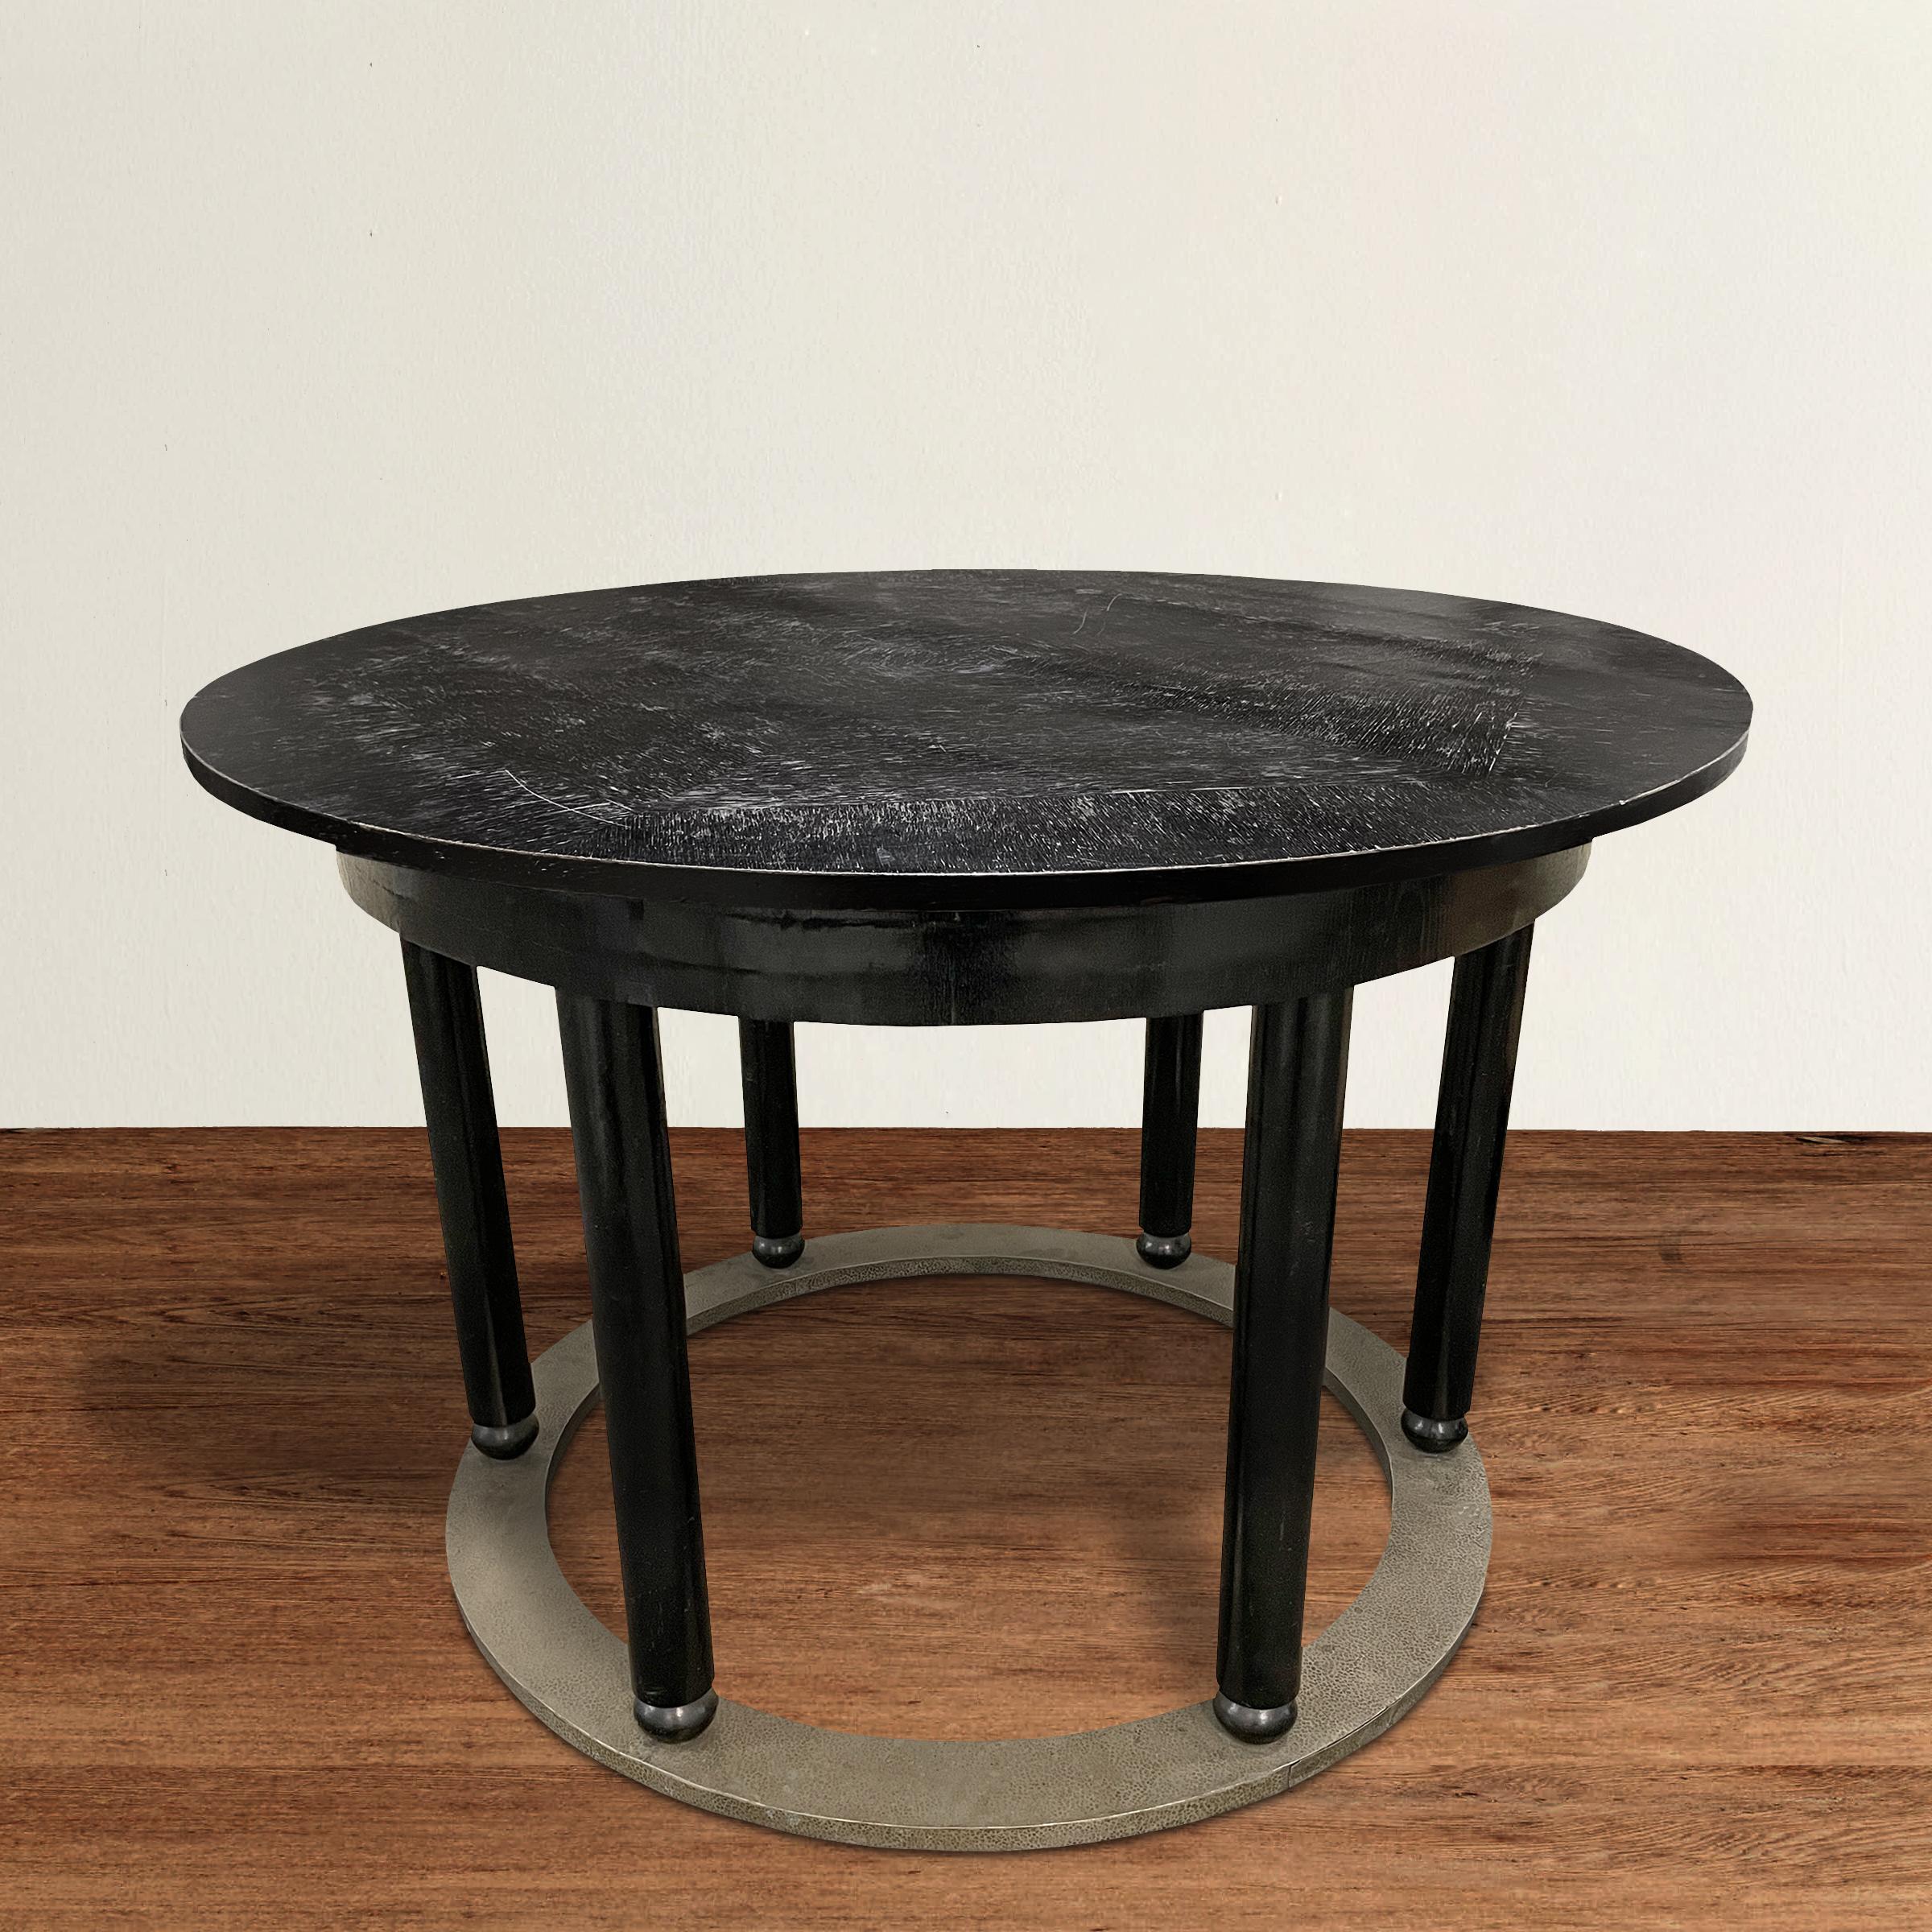 An incredible early 20th century Vienna Secession center table with six legs ending in ball feet, and resting on a hand-hammered white brass ring base. It's possible this piece was designed by famed Modernist theorist Adolf Loos, but we're not 100